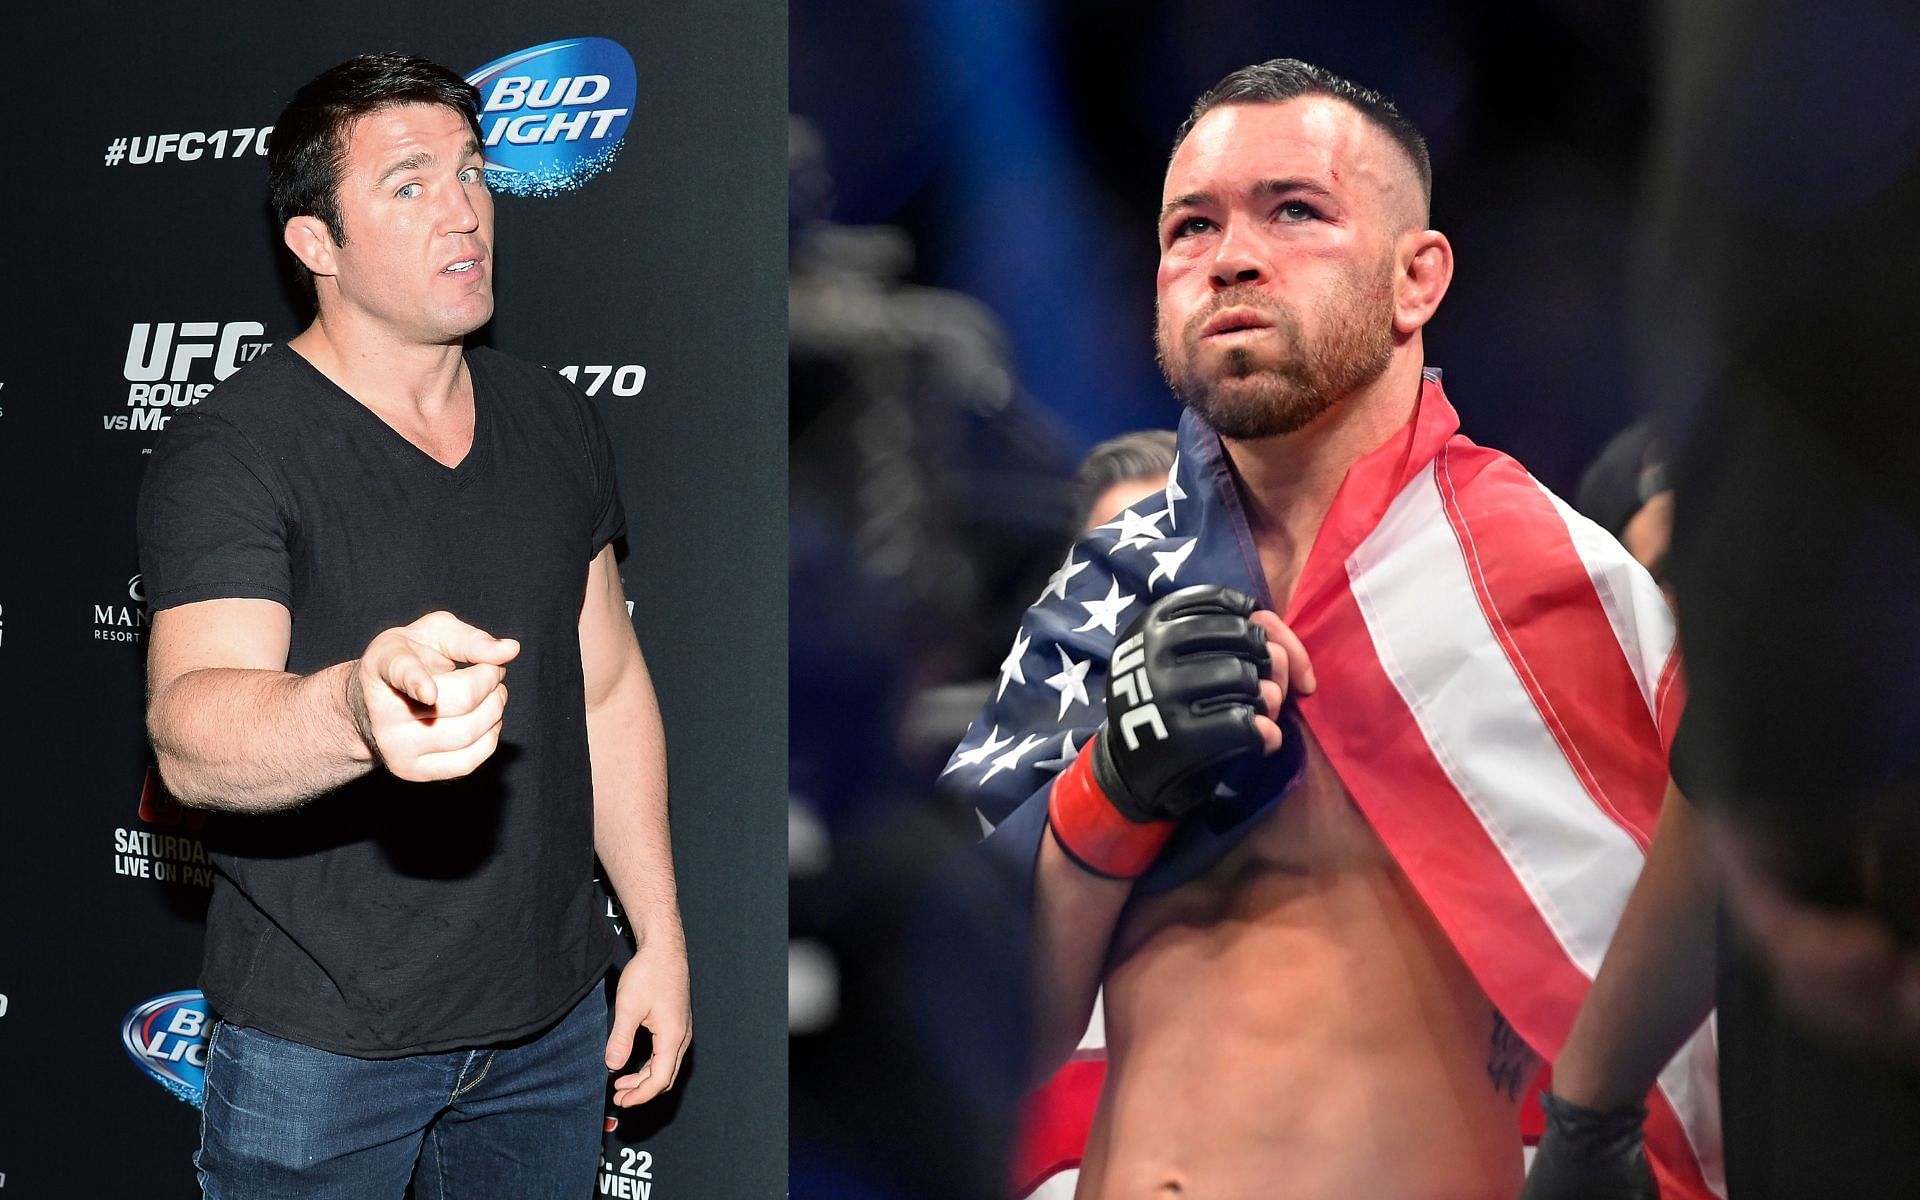 Chael Sonnen (left) and Colby Covington (right)